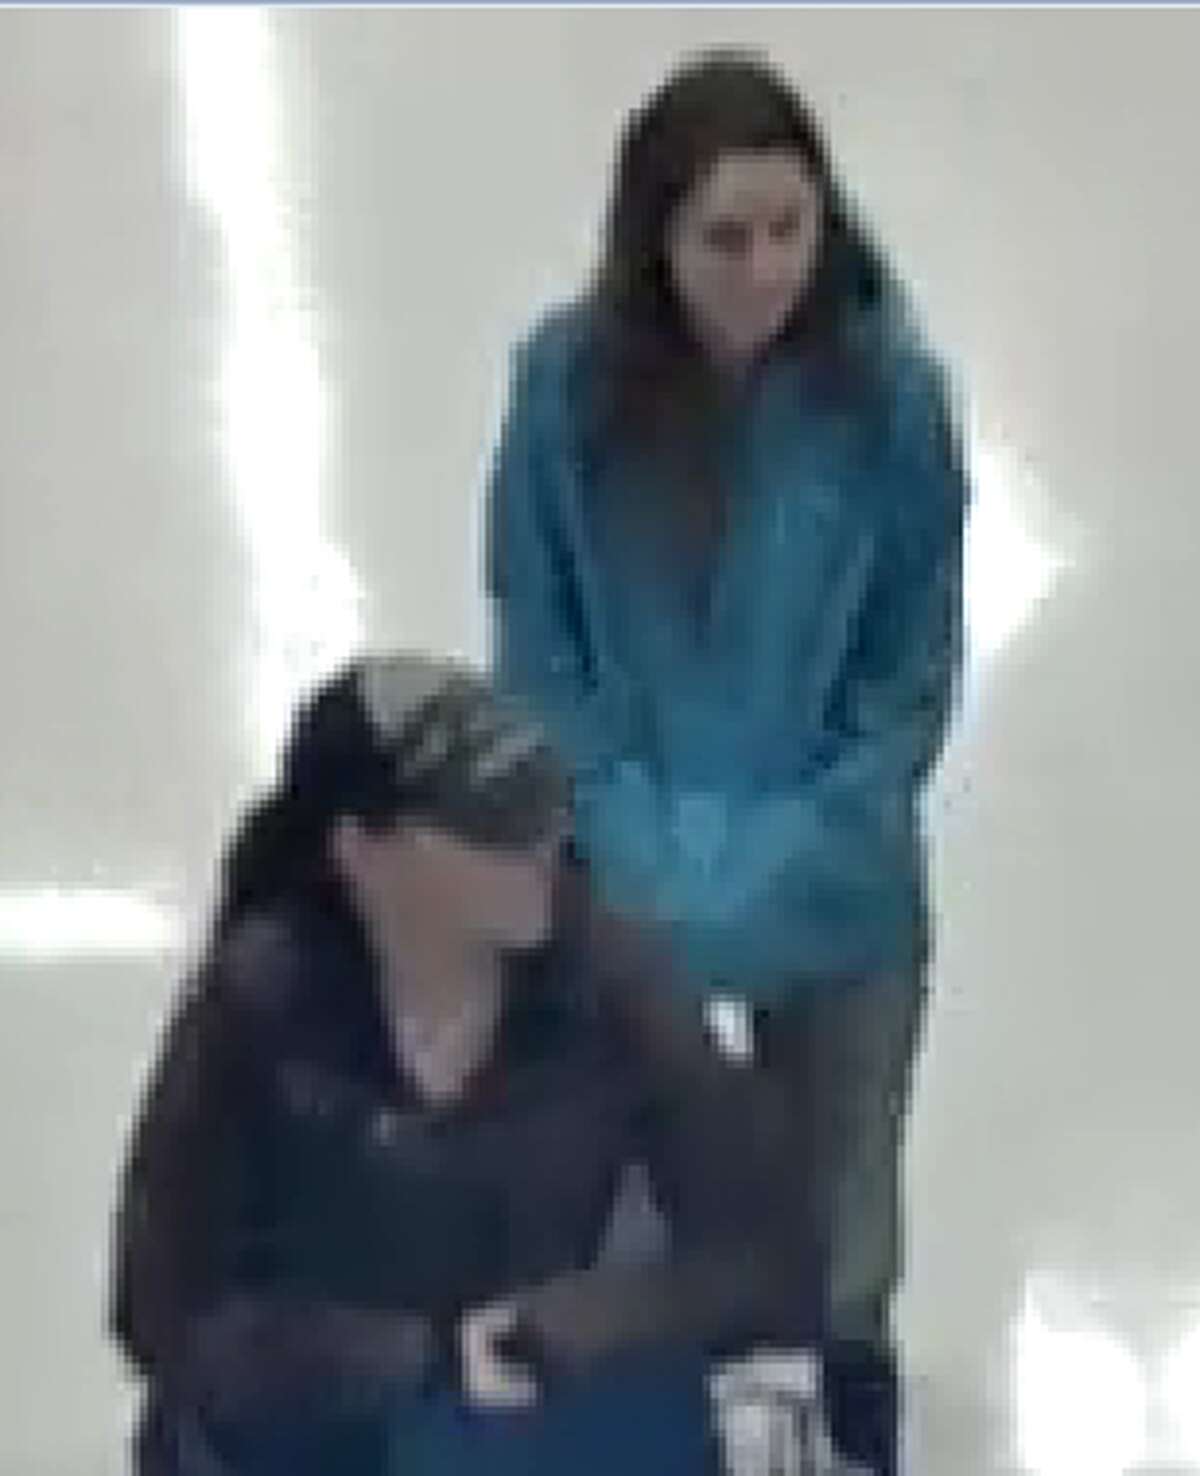 Midland Police are seeking assistance in identifying two women suspected of larceny from a north Midland store on Feb. 3, 2020.